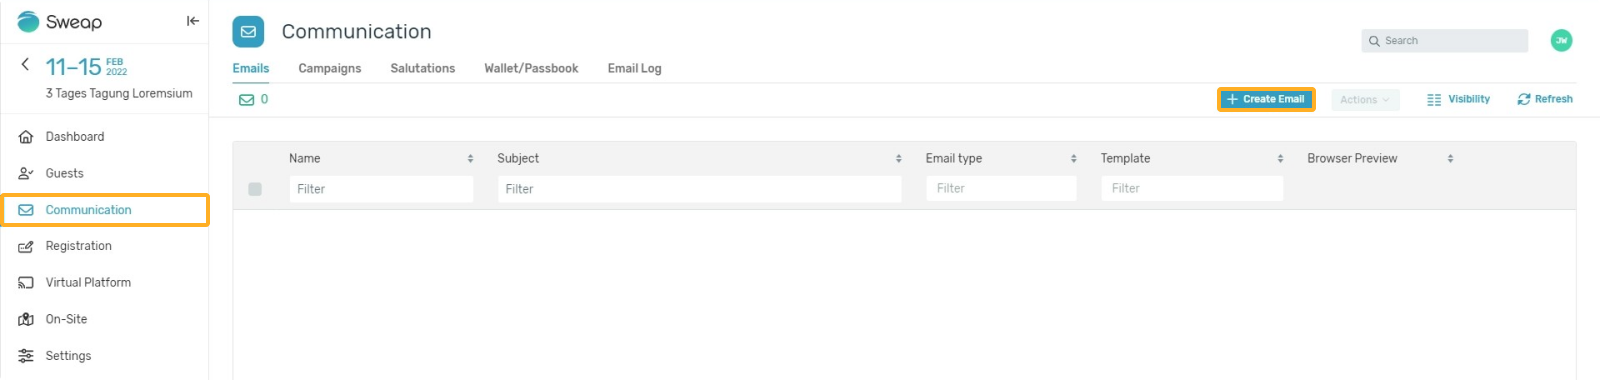 create email within communication section